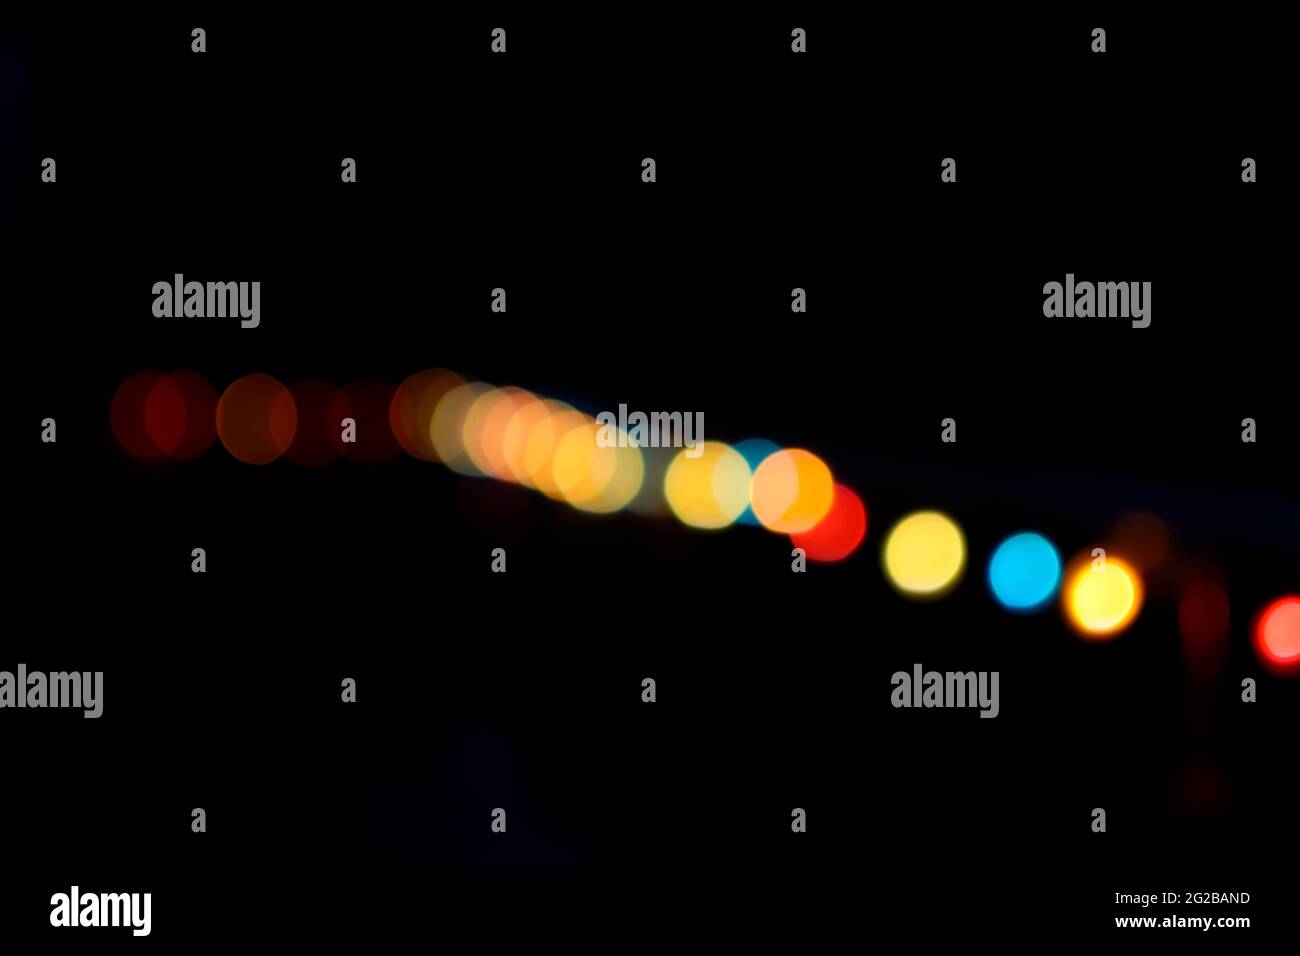 Deliberately defocused blurry abstract bokeh light background with various colors during night. Stock Photo